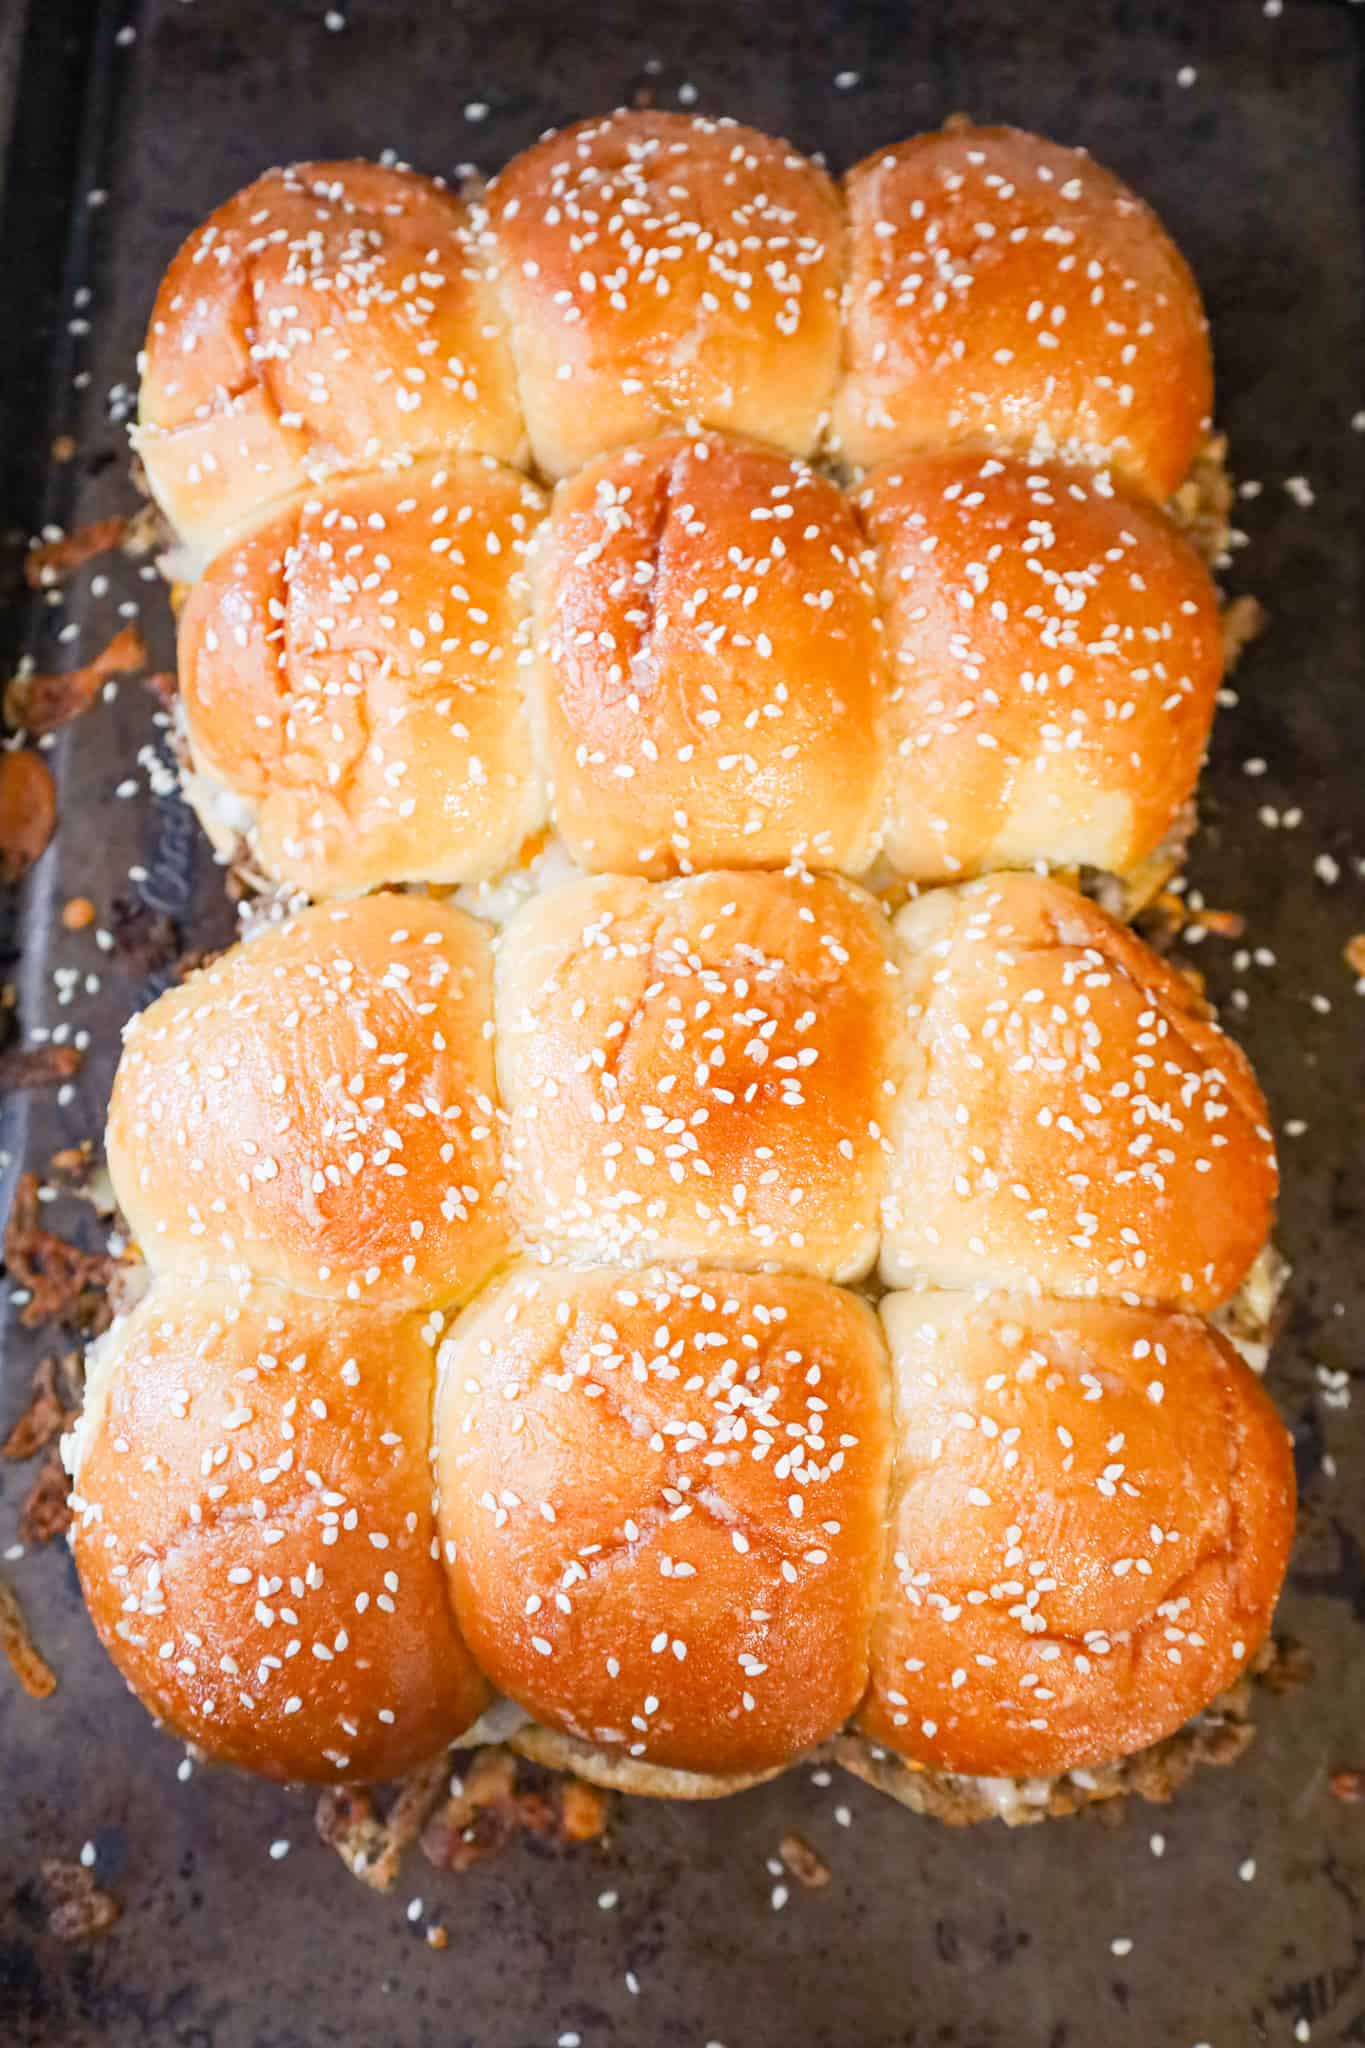 melted butter and sesame seeds on top of cheeseburger sliders